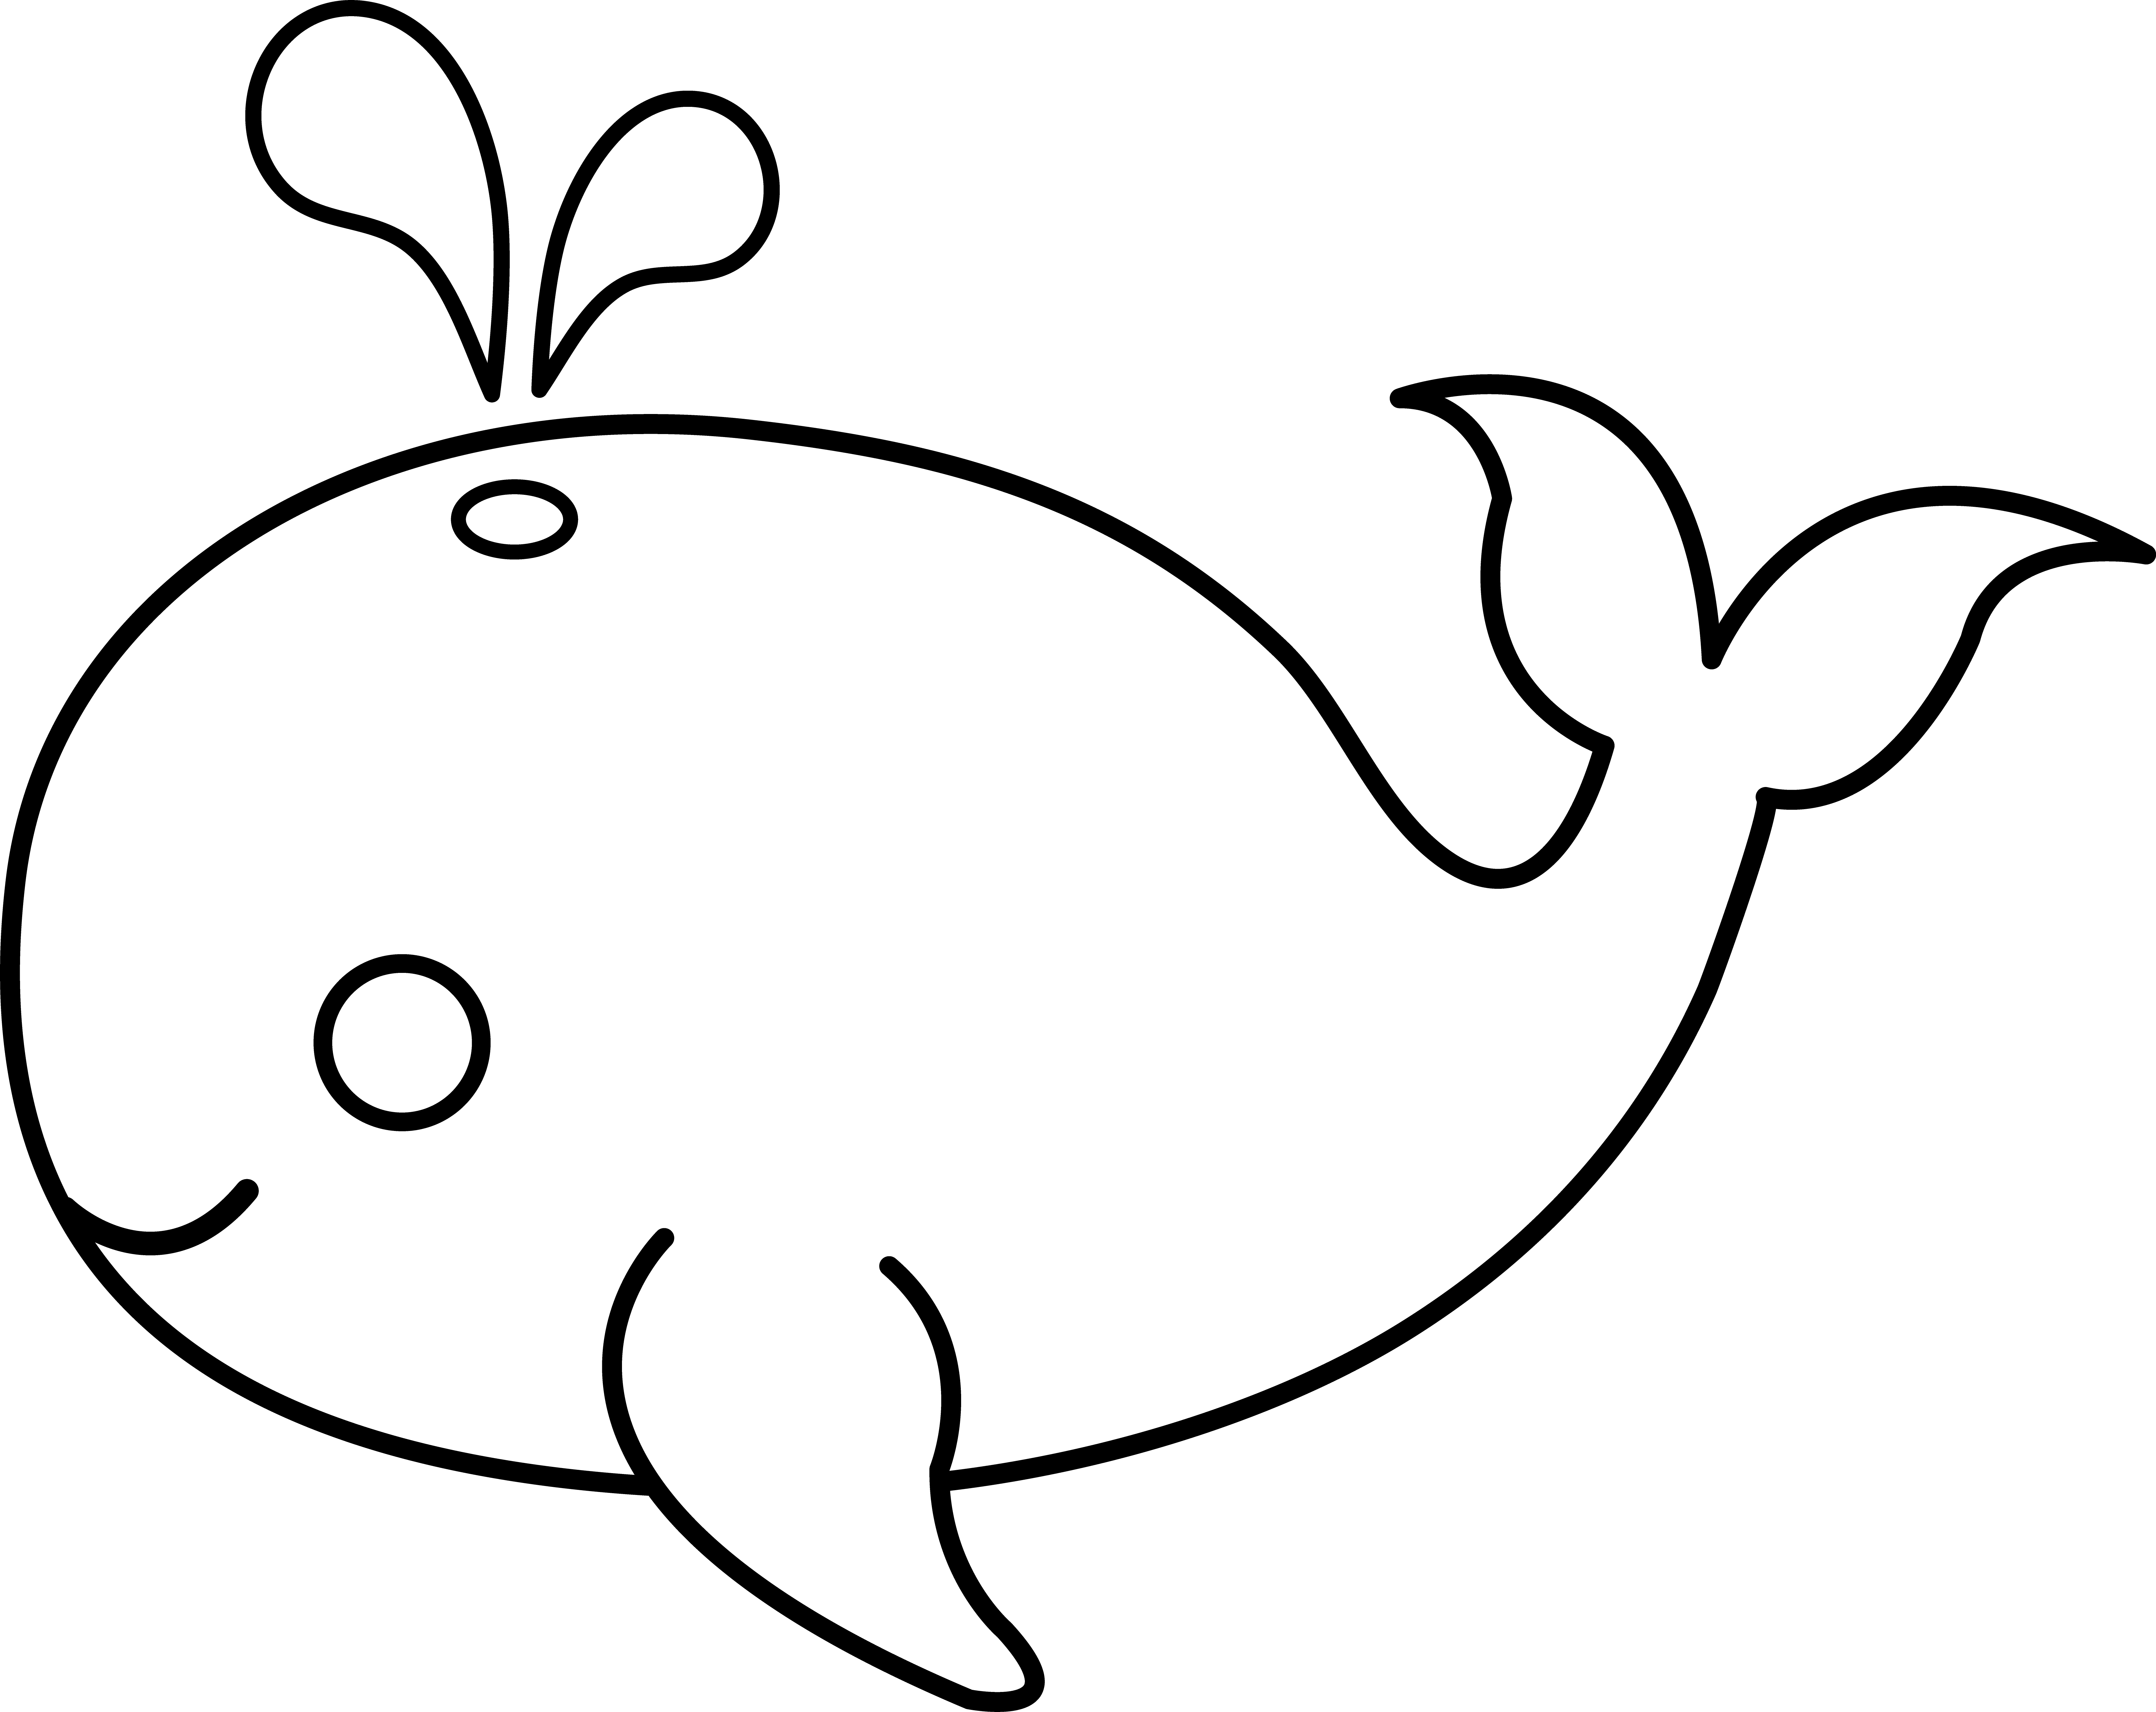 whale outline Whale clipart fish outline pencil and in color whale png